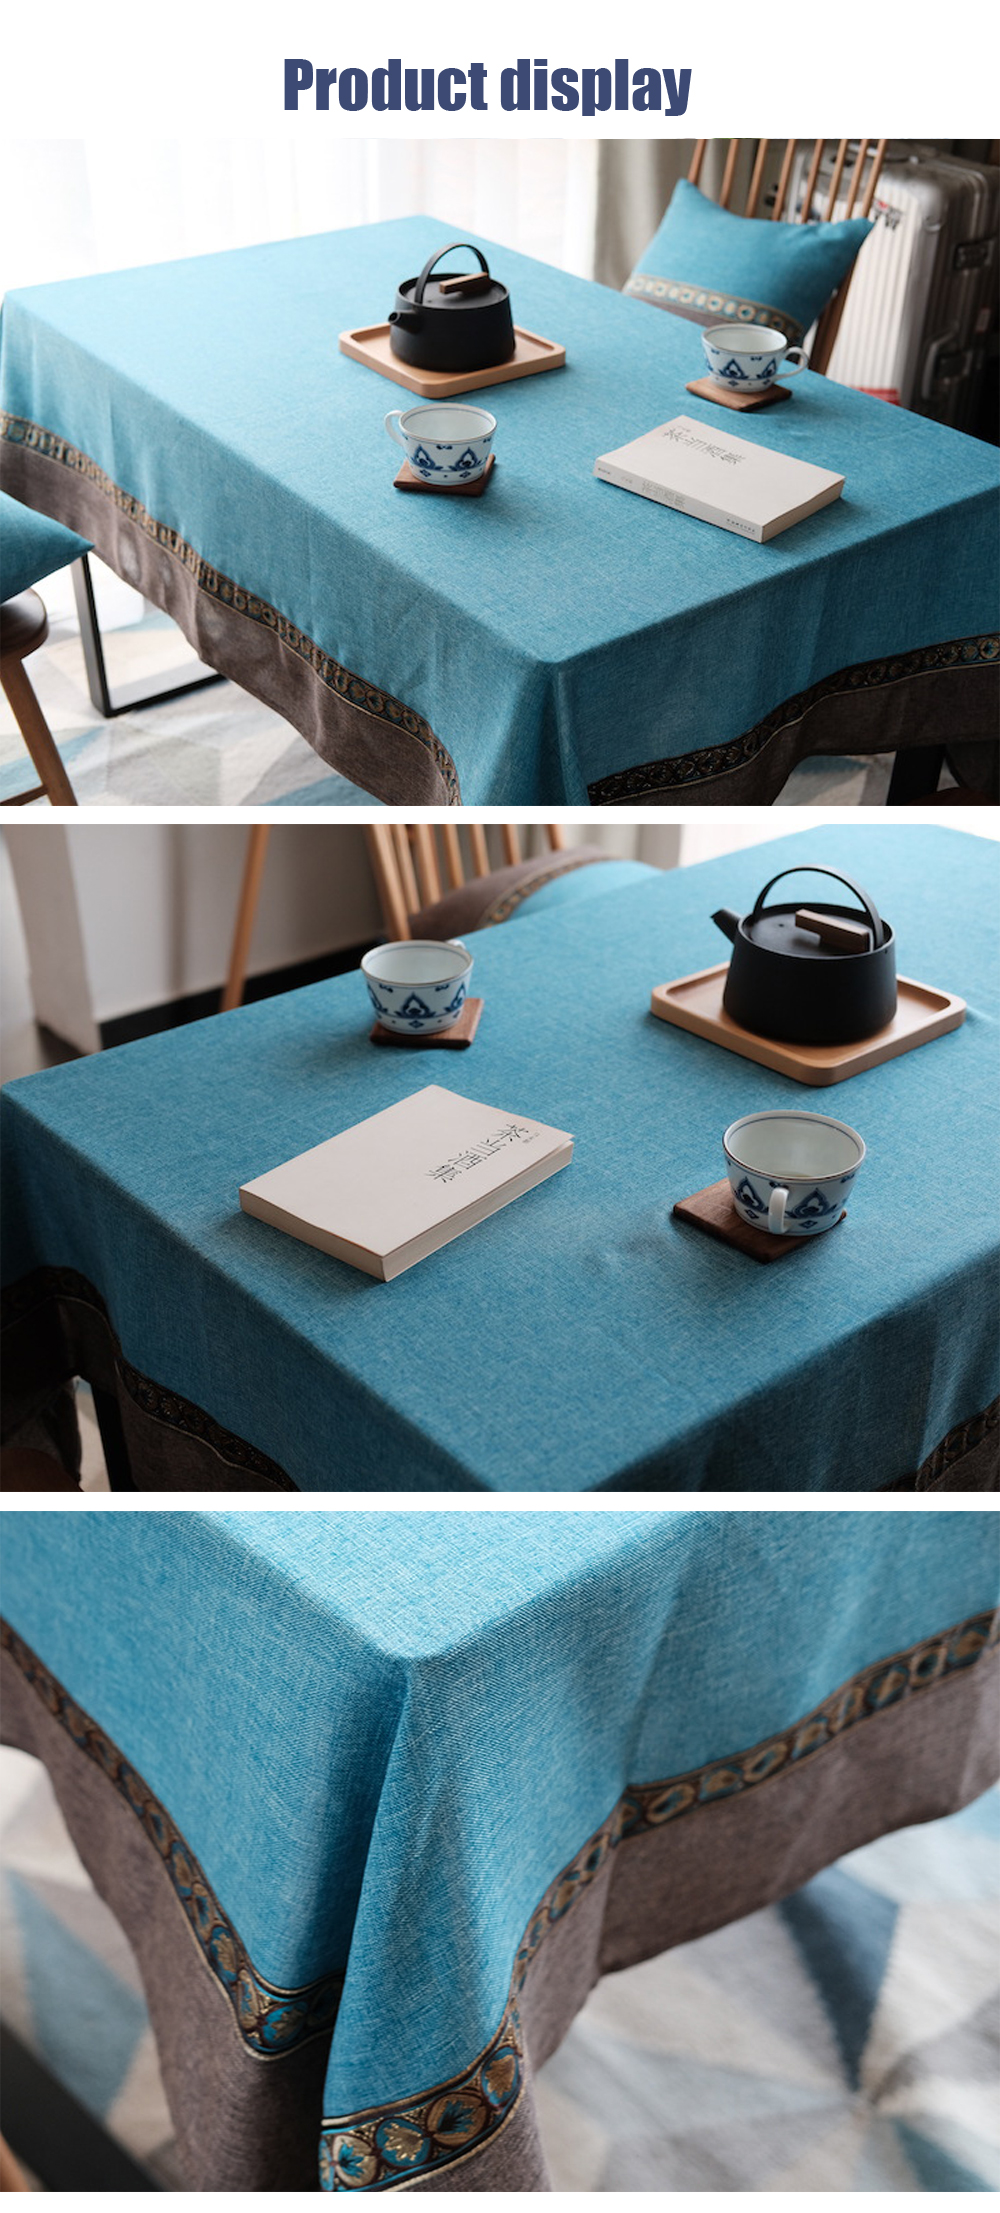 Waterproof Retro American Western Countryside Artistic Lace Tablecloth